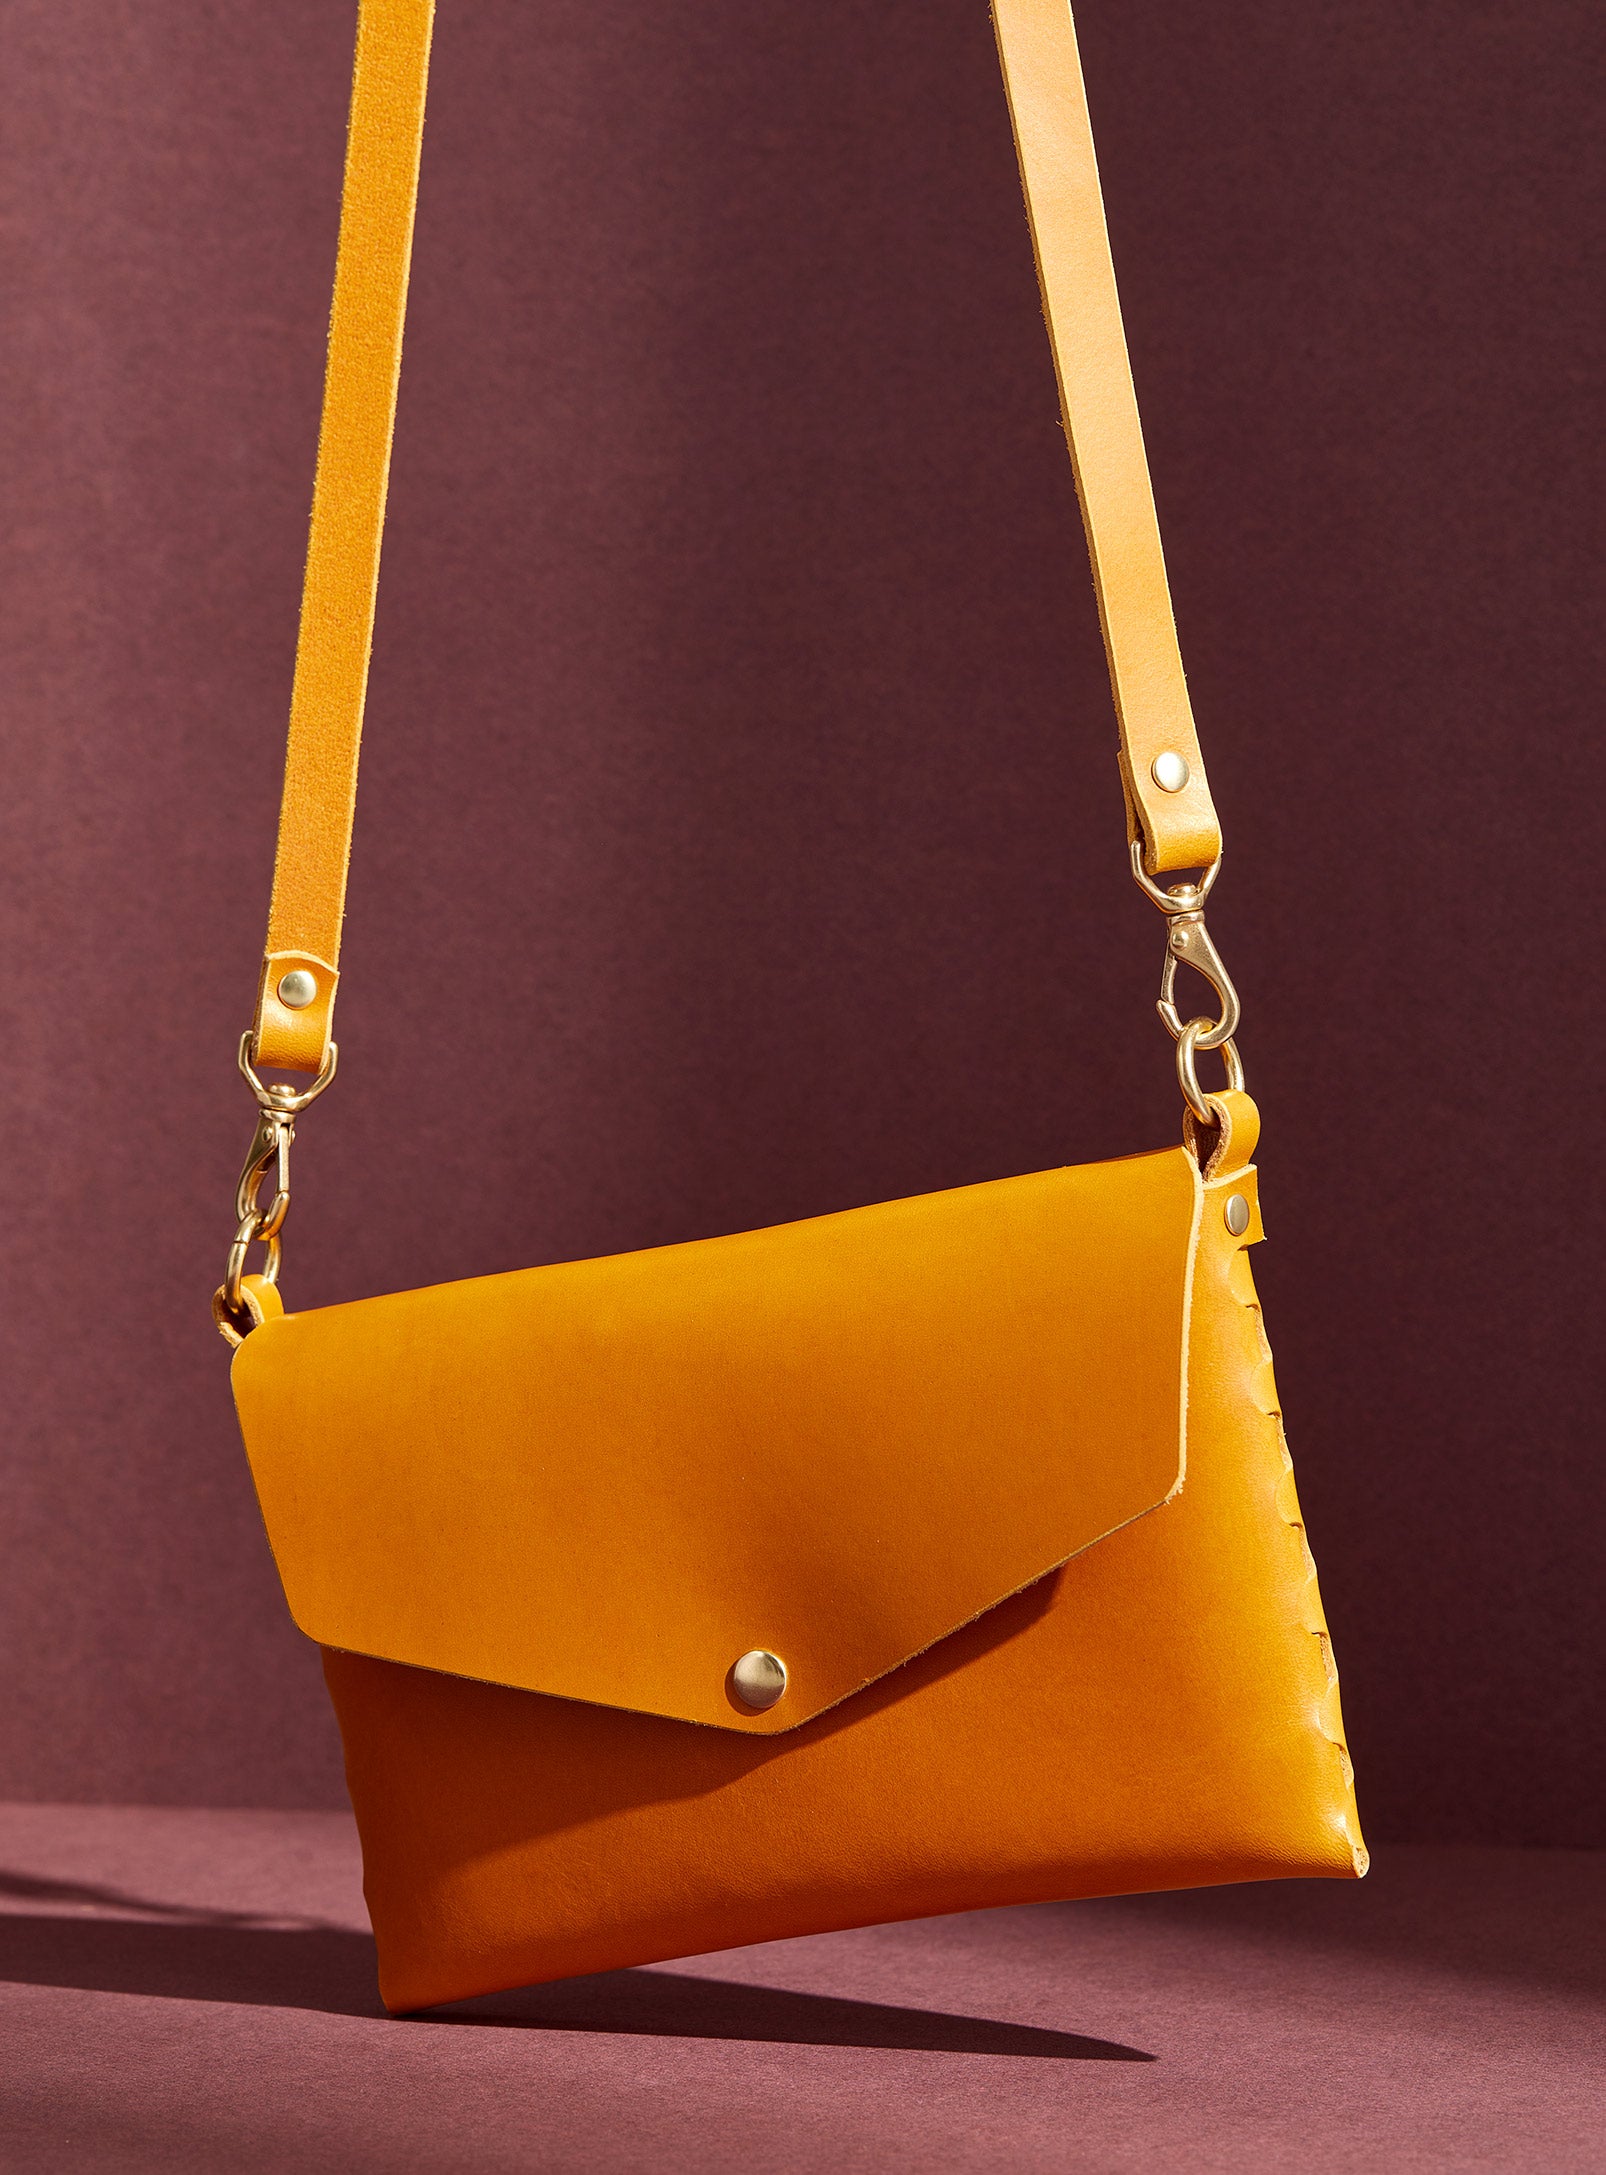 modjūl's mini leather bag in yellow. A rectangular-shaped bag with long straps, handmade in Canada using quality Italian leather and brass hardware.